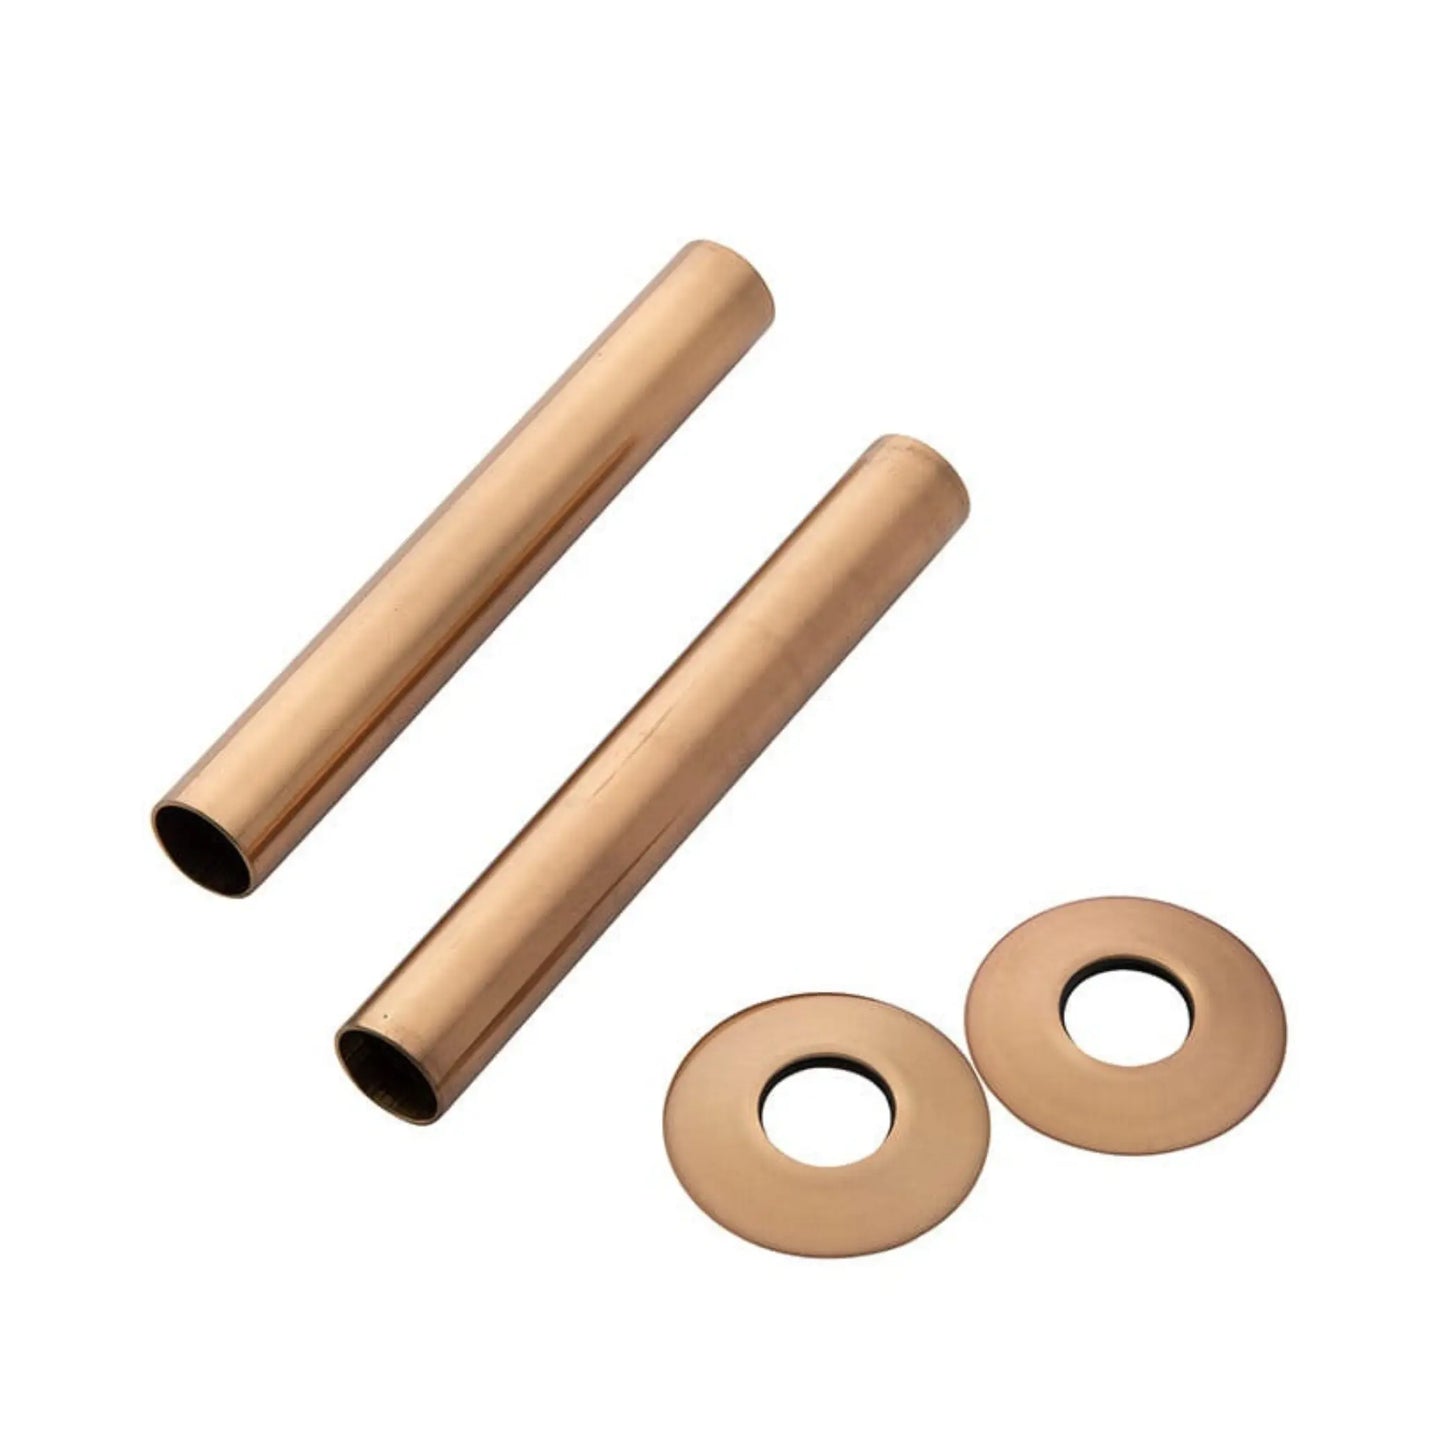 Arroll, Radiator Pipe Covers, Pipe Sleeves & Floor Plates, 9 Finishes, 130 x 44mm - Beyond Bathing 